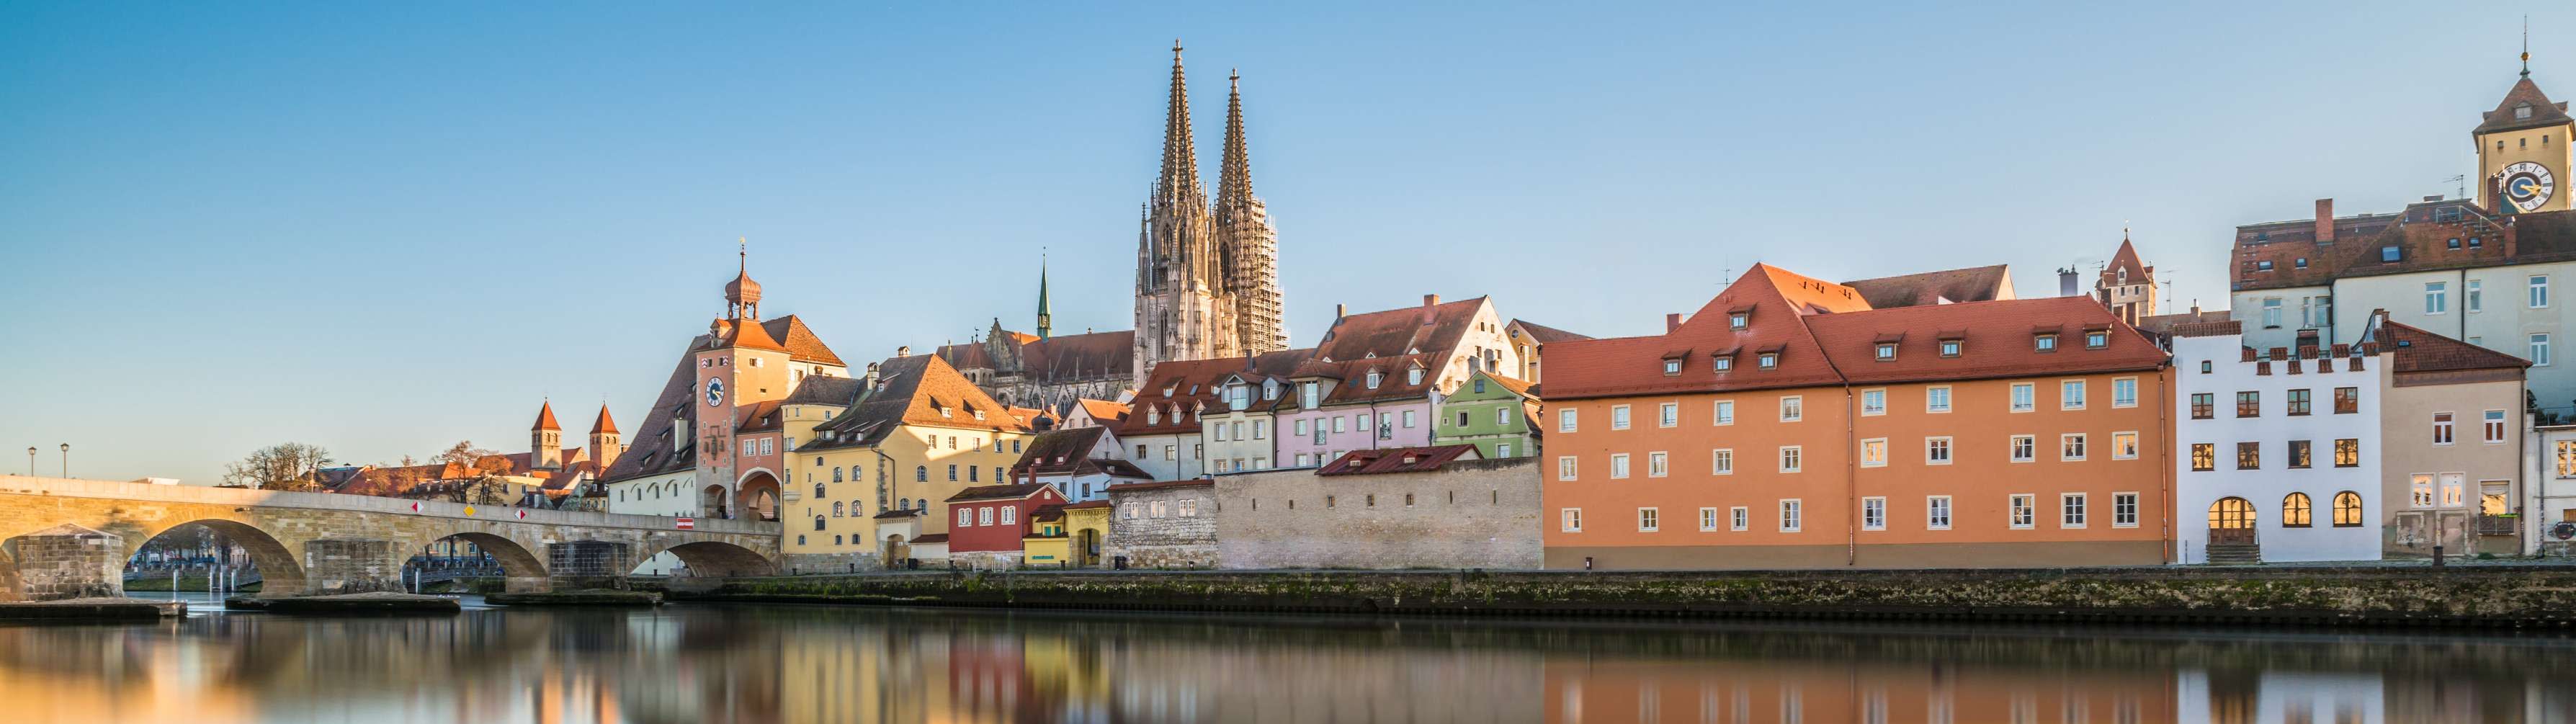 Historic buildings sit alongside the river in the picturesque town of Regensburg.